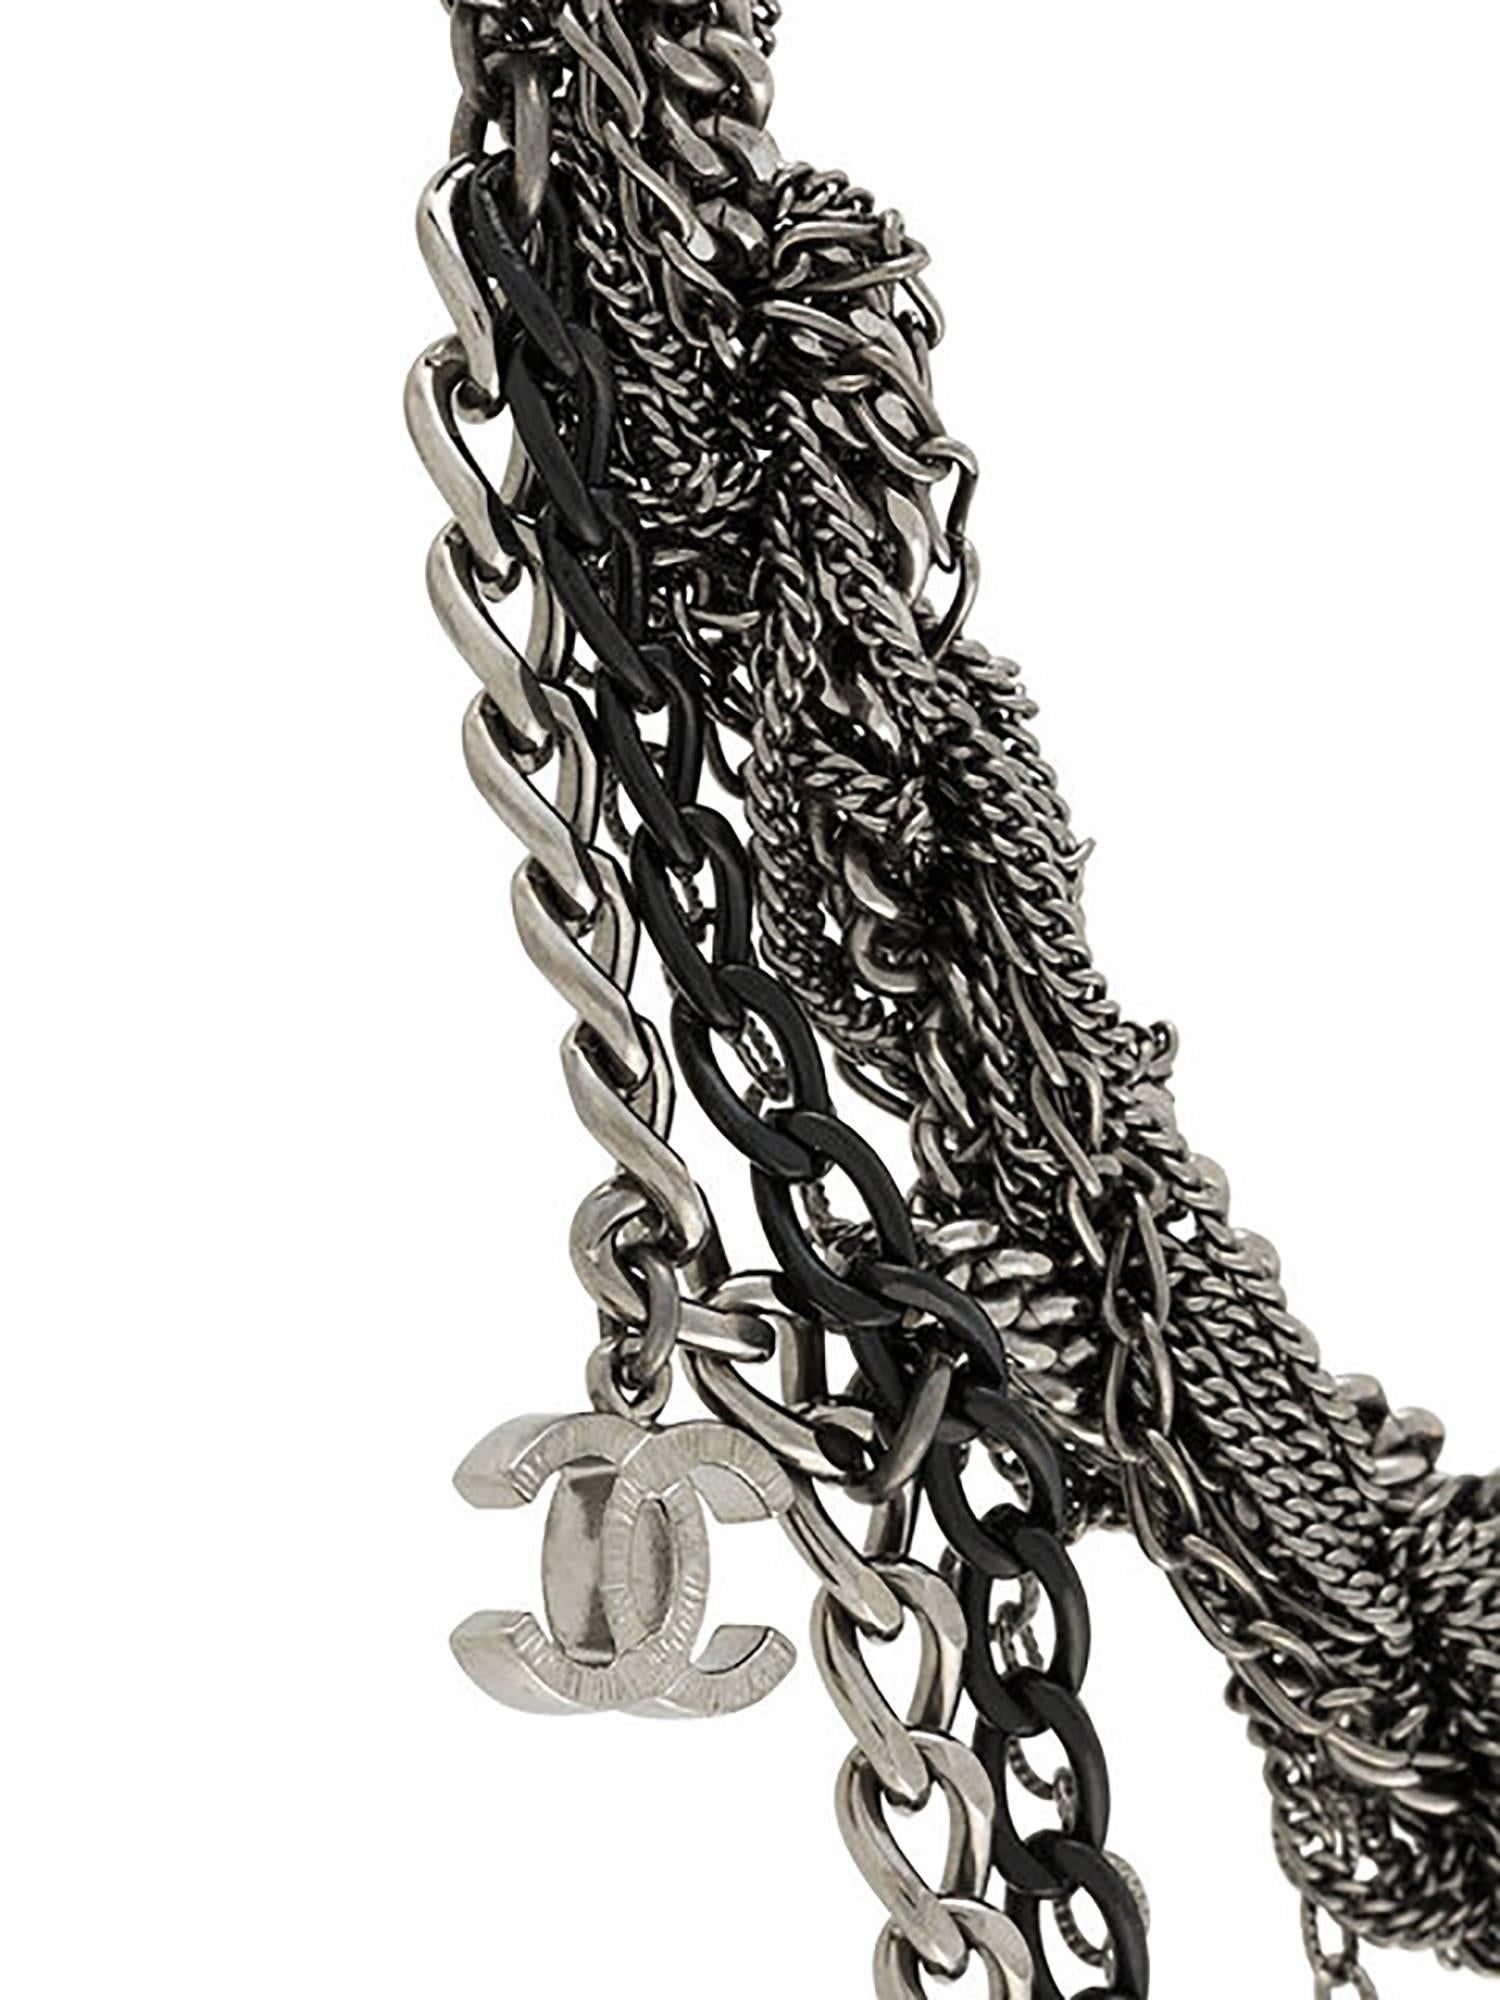 Capturing the dark glamour so often seen at Chanel, this necklace is crafted from ropes of gunmetal and black chain, finished with cascades of Chanel monogram charms. Sitting comfortably around the neck with a black fabric-covered elastic, the short